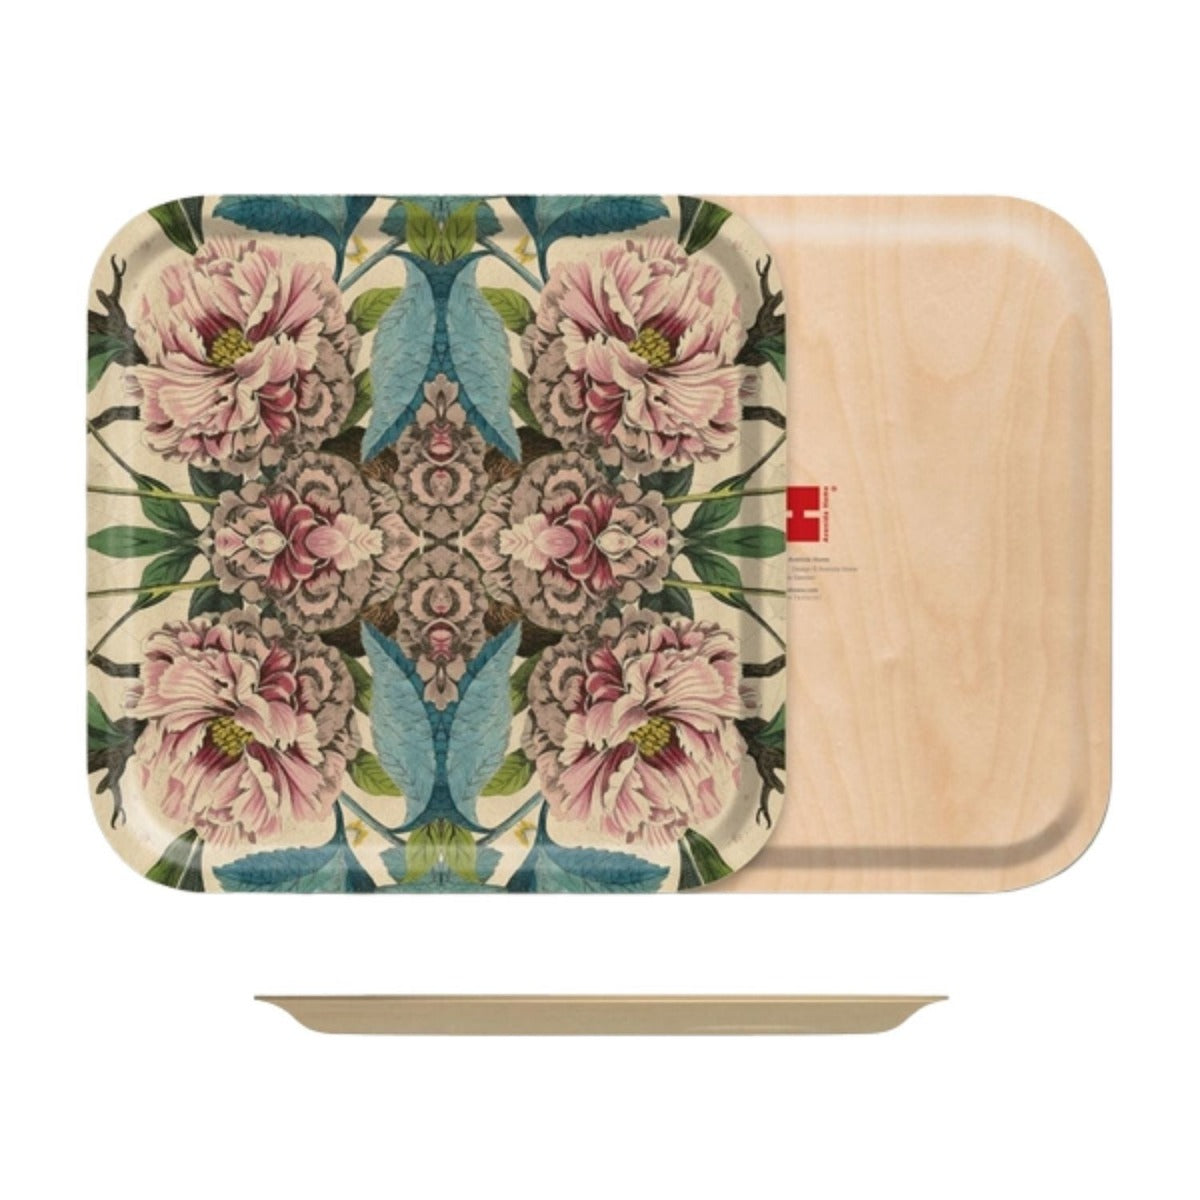 Patch NYC Peonies Square Birch Wood Tray